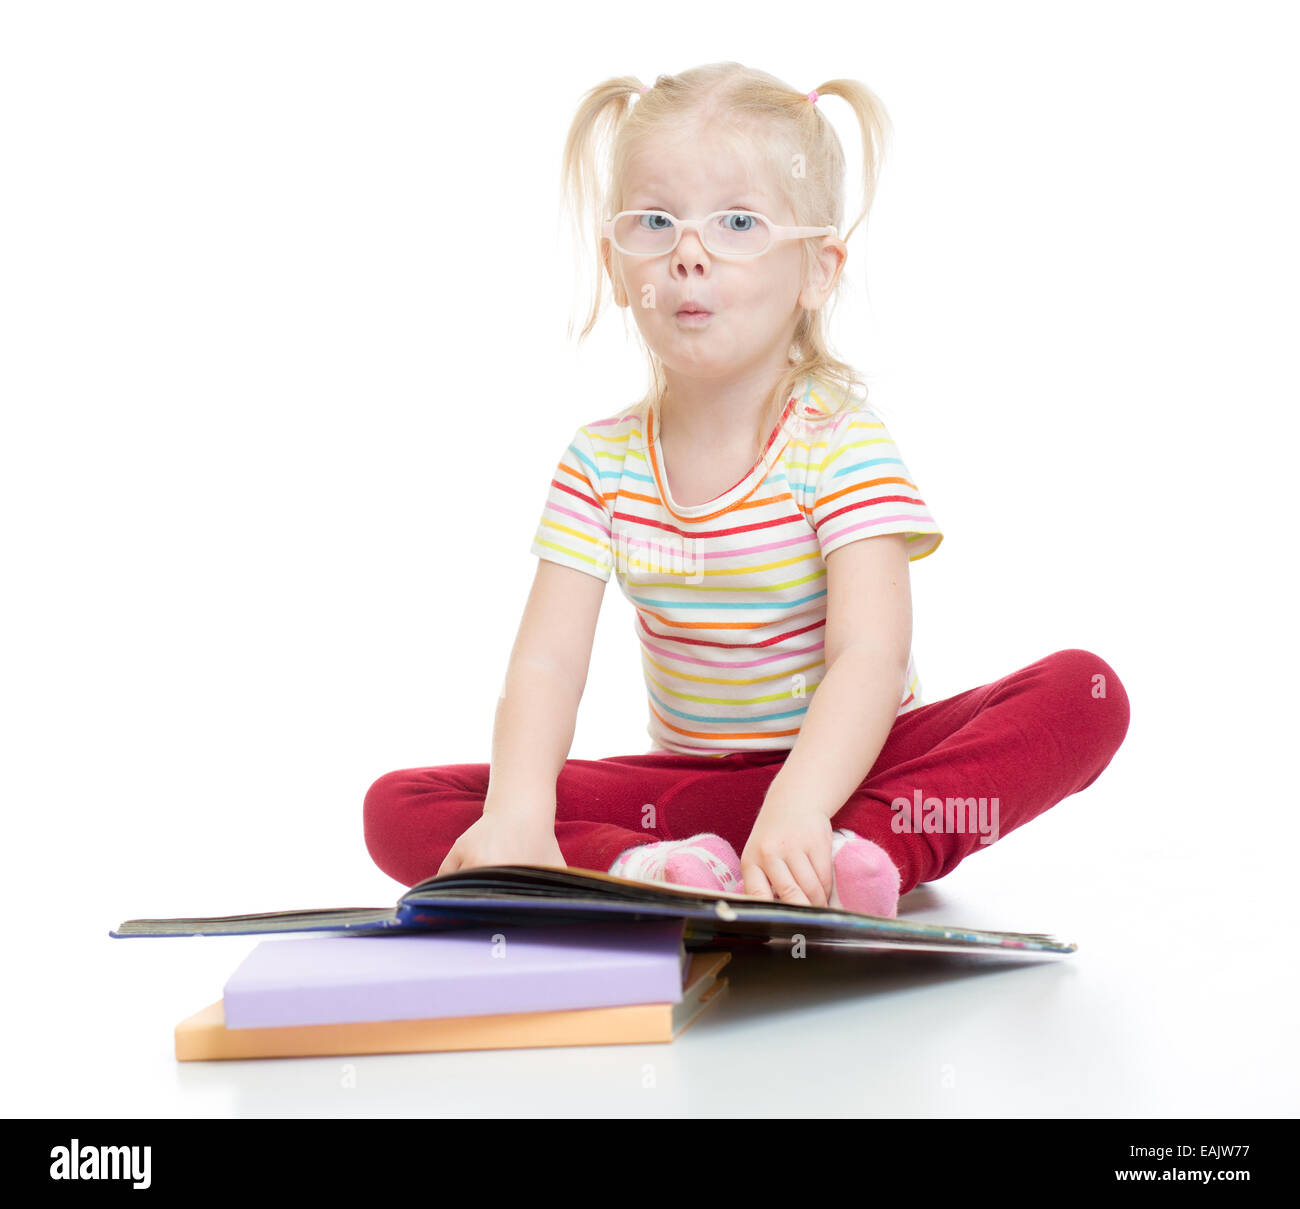 Funny child in eyeglases reading book isolated Stock Photo